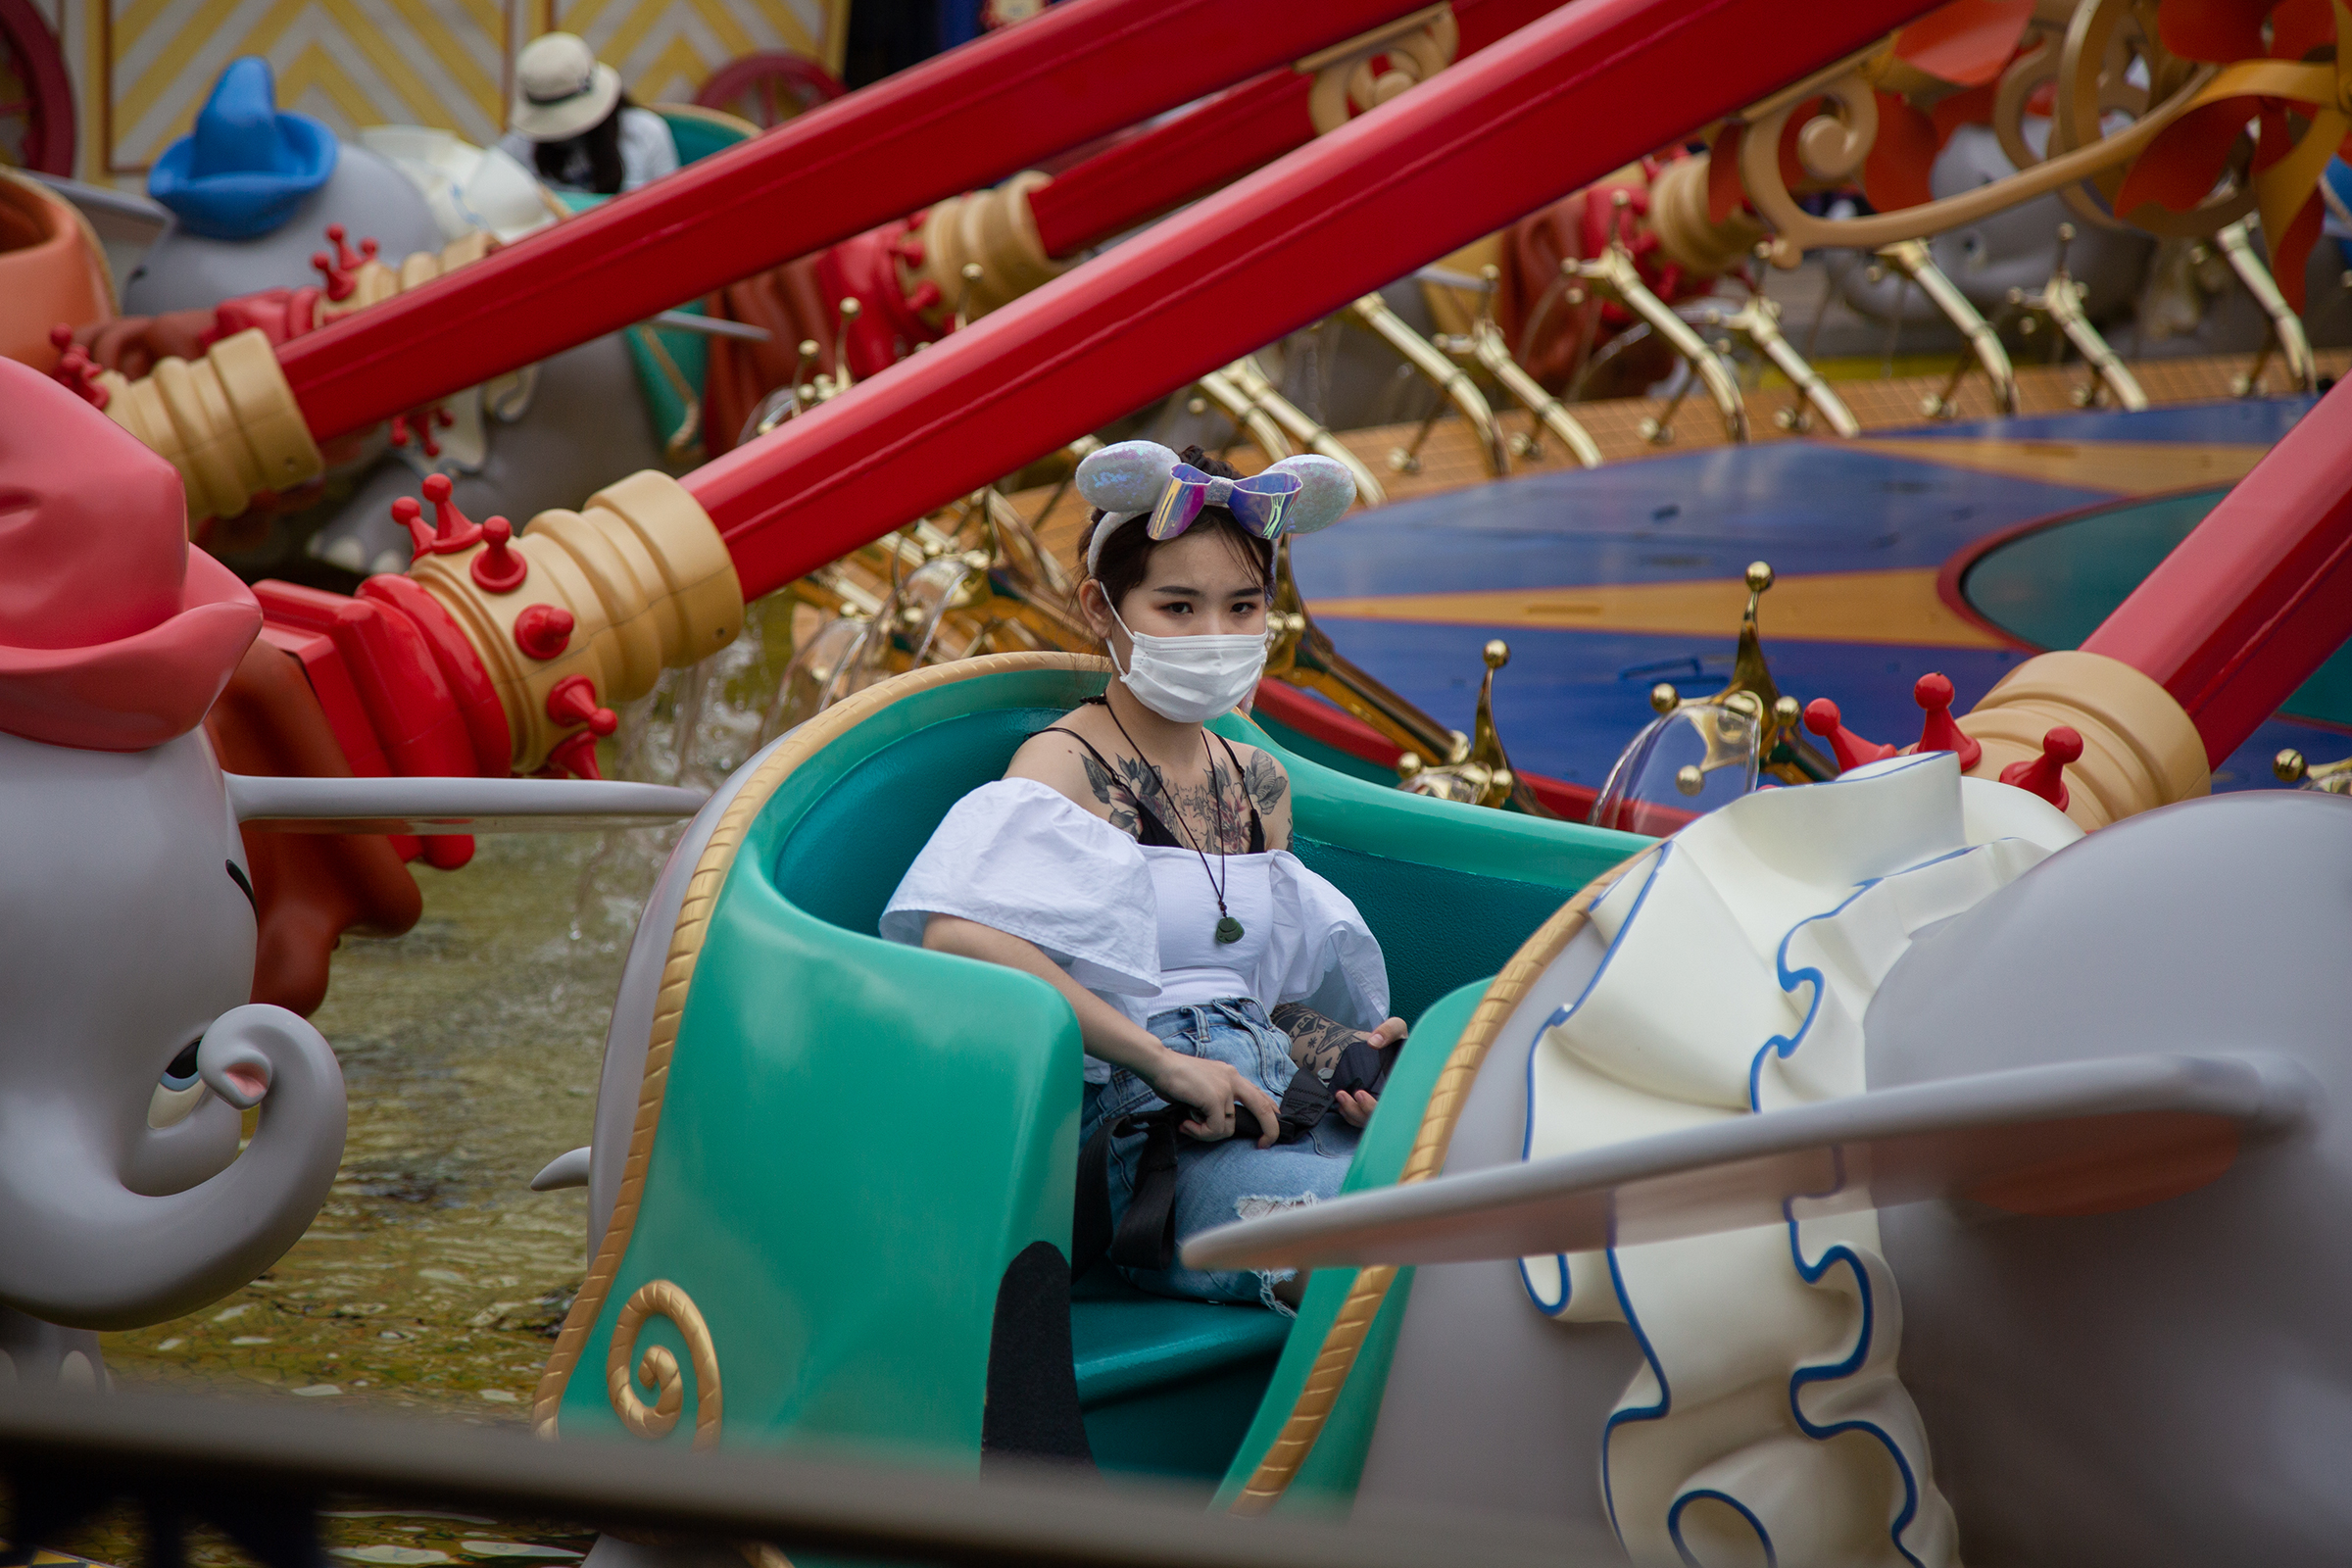 A visitor sits on the Dumbo the Flying Elephant attraction at Shanghai Disneyland on May 11, the day it reopened. (Henri Shi for TIME)